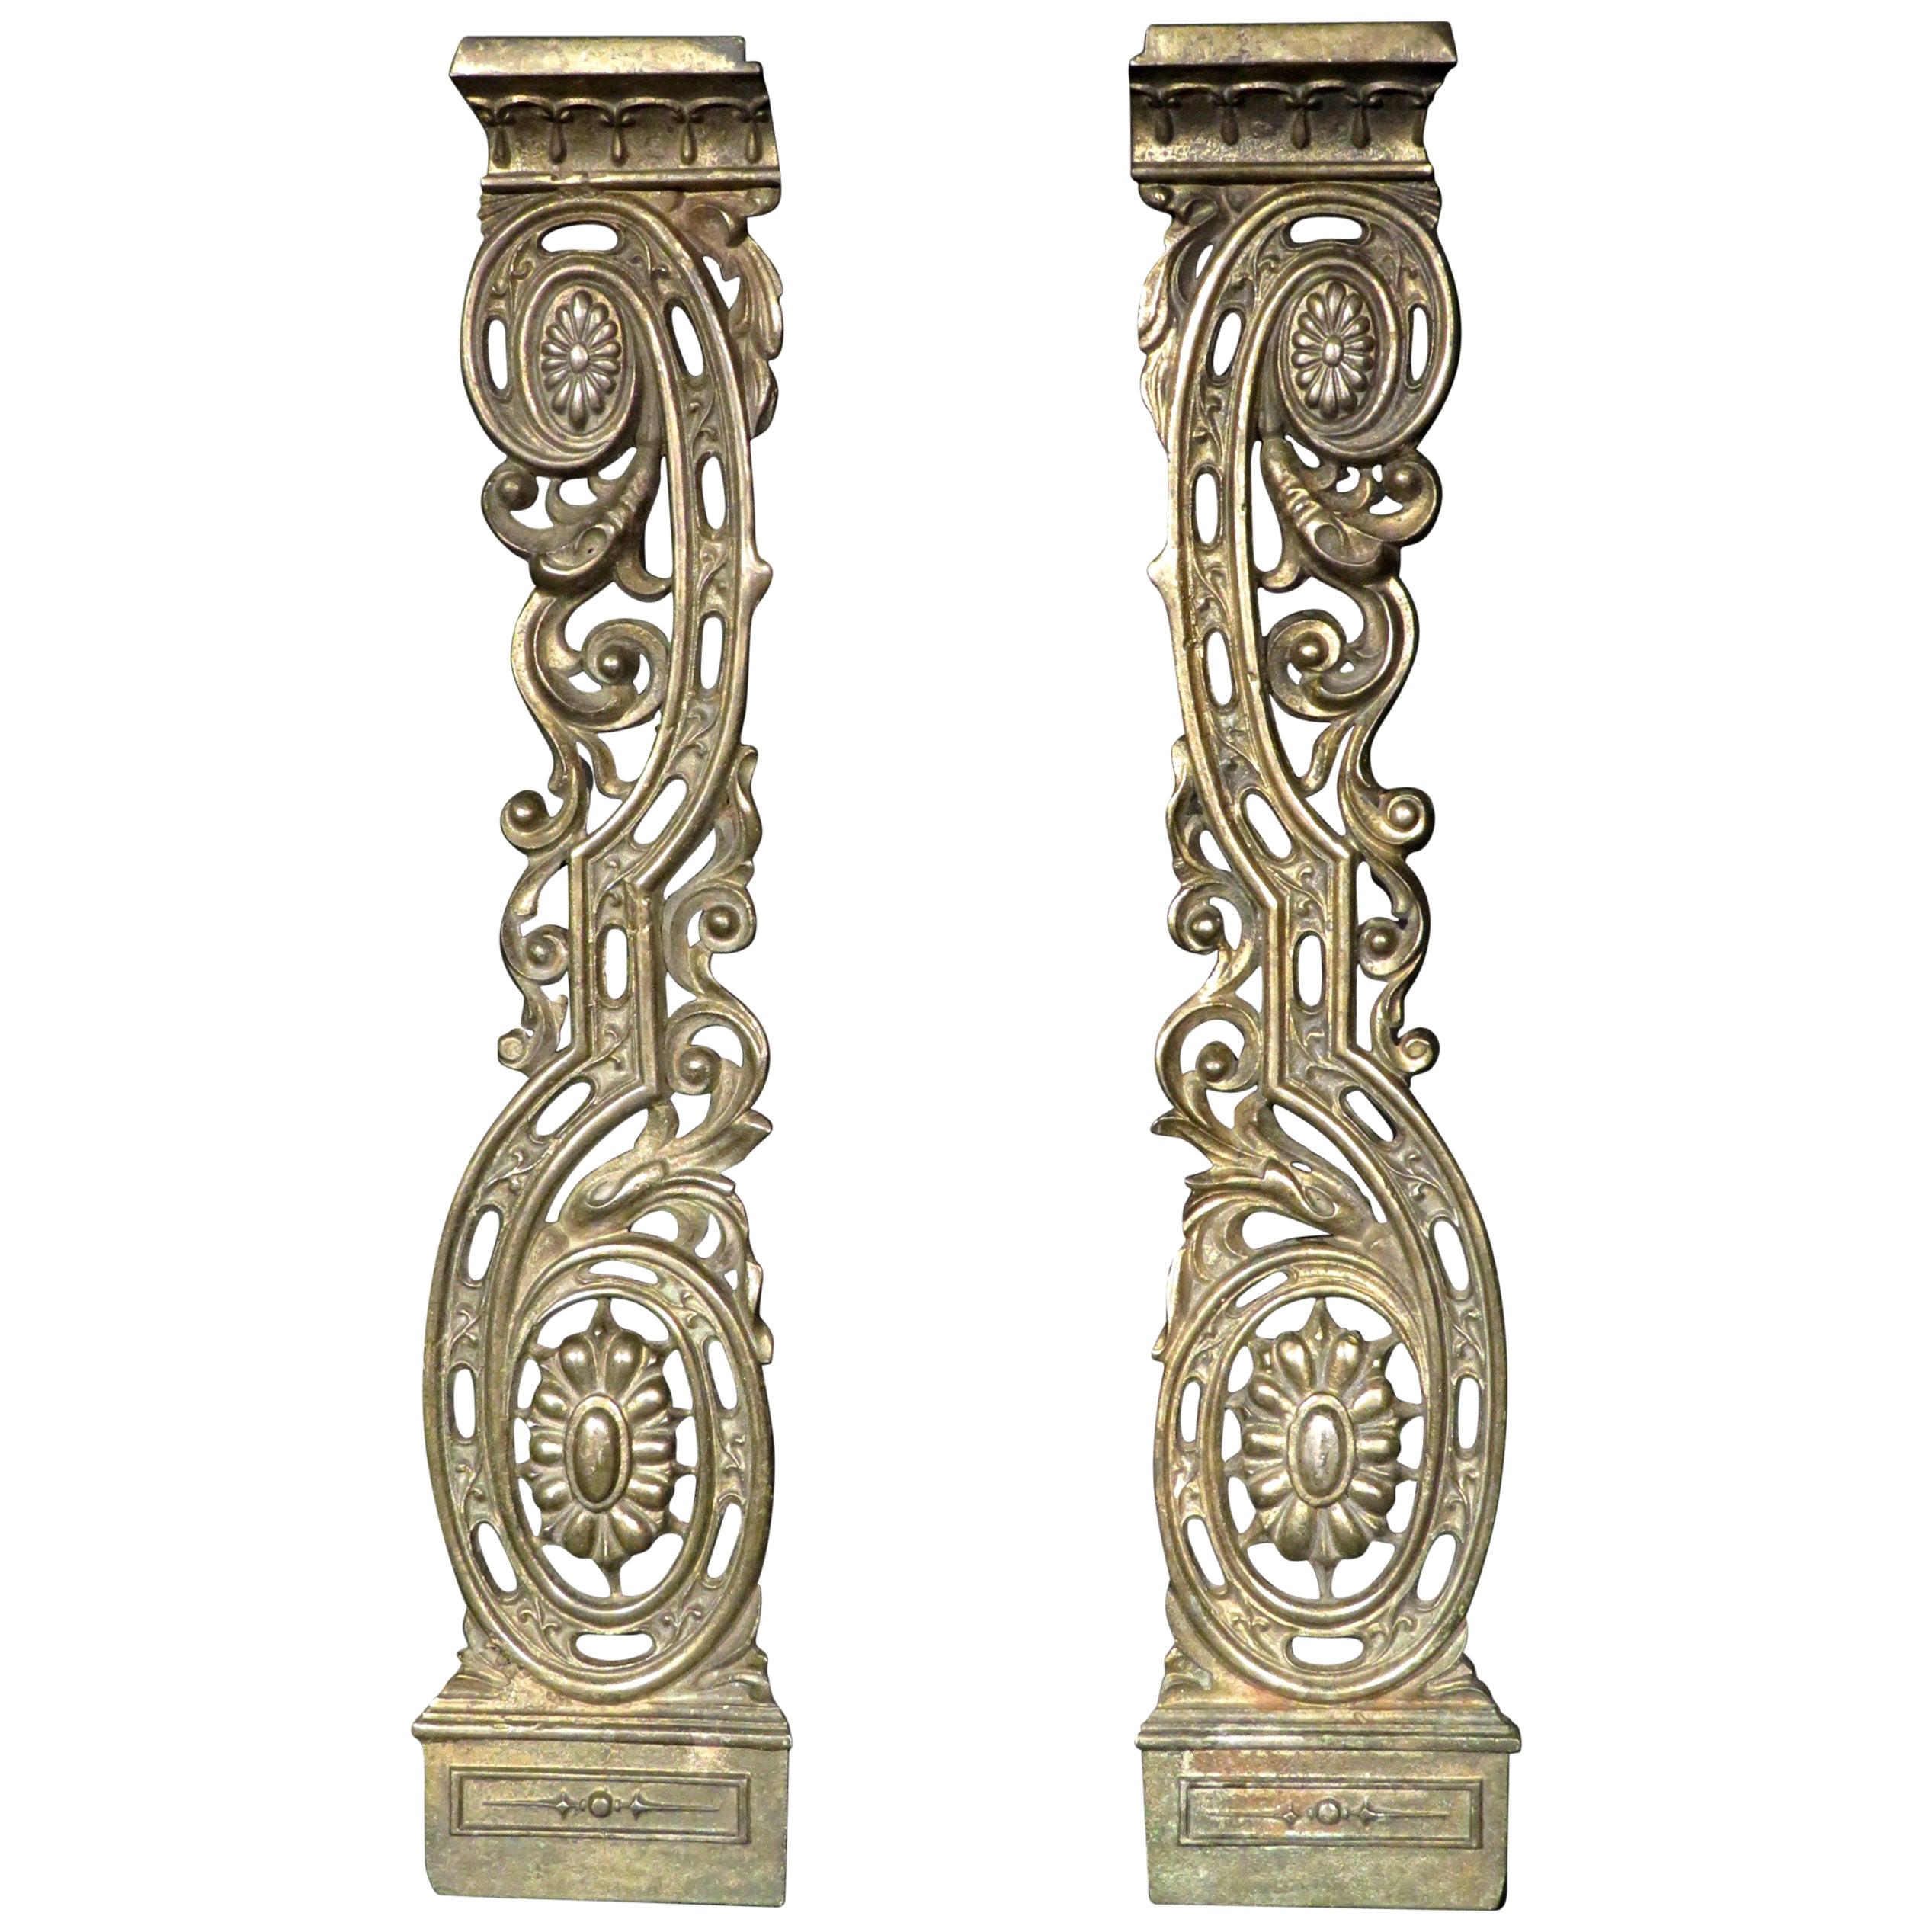 Pair of 19th Century Neoclassical Inspired Ormolu Architectural Elements For Sale